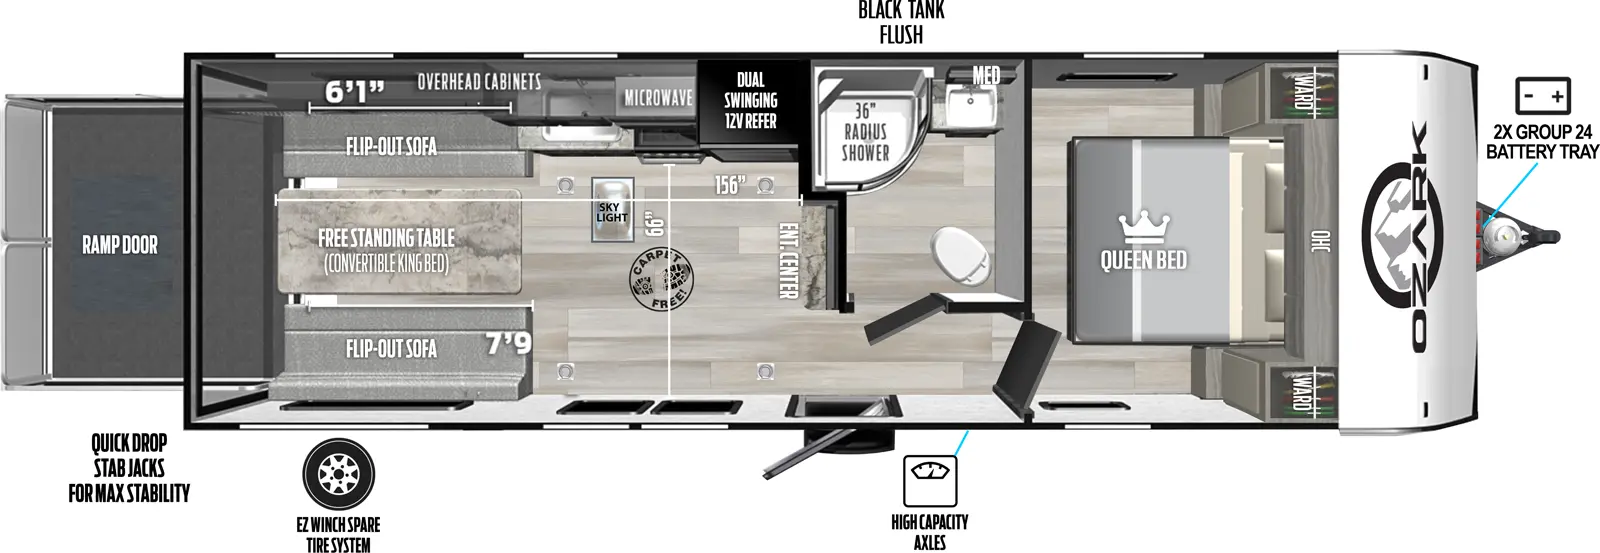 The Ozark 2500THK is a toy hauler model with one side entry door, pass-through storage, LP quick connect, spray port, exterior shower, black tank flush, and 15' awning on the exterior. Inside, there is a 60" x 74" queen bed in the front of the unit, with wardrobe cabinets and room to stand on either side of the bed and overhead cabinets mounted above. The bedroom door leads into a short hallway that opens into the main living area. The bathroom is located on the right side of the hallway and contains a corner radius shower with skylight, sink and medicine cabinet, and commode. There is a TV mounted on the outside of the far bathroom wall, situated perpendicular to the length of the unit and facing the rear wall. The kitchen area is on the right and contains an 11 cubic foot refrigerator, stovetop and oven, and sink, with cabinets and a microwave mounted overhead. In the rear is a removable table with a 30" x 72" sofa sleeper on either side.When these are moved out of the way, the remaining space functions as a 156" long, 84" high garage.